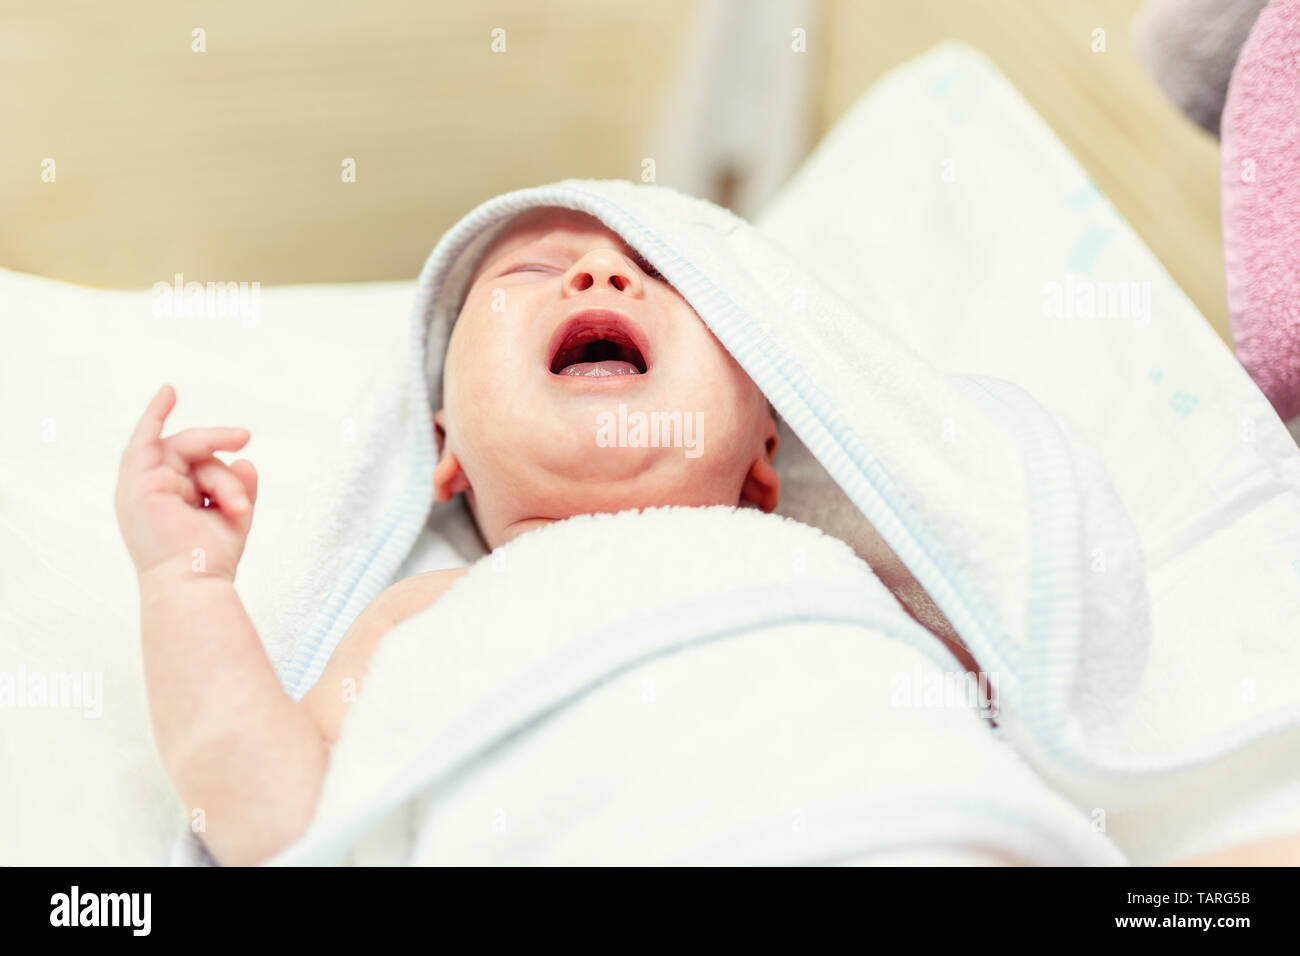 Cute infant baby in white towel crying after first bathing at bathroom. Newborn children healthcare and hygiene Stock Photo